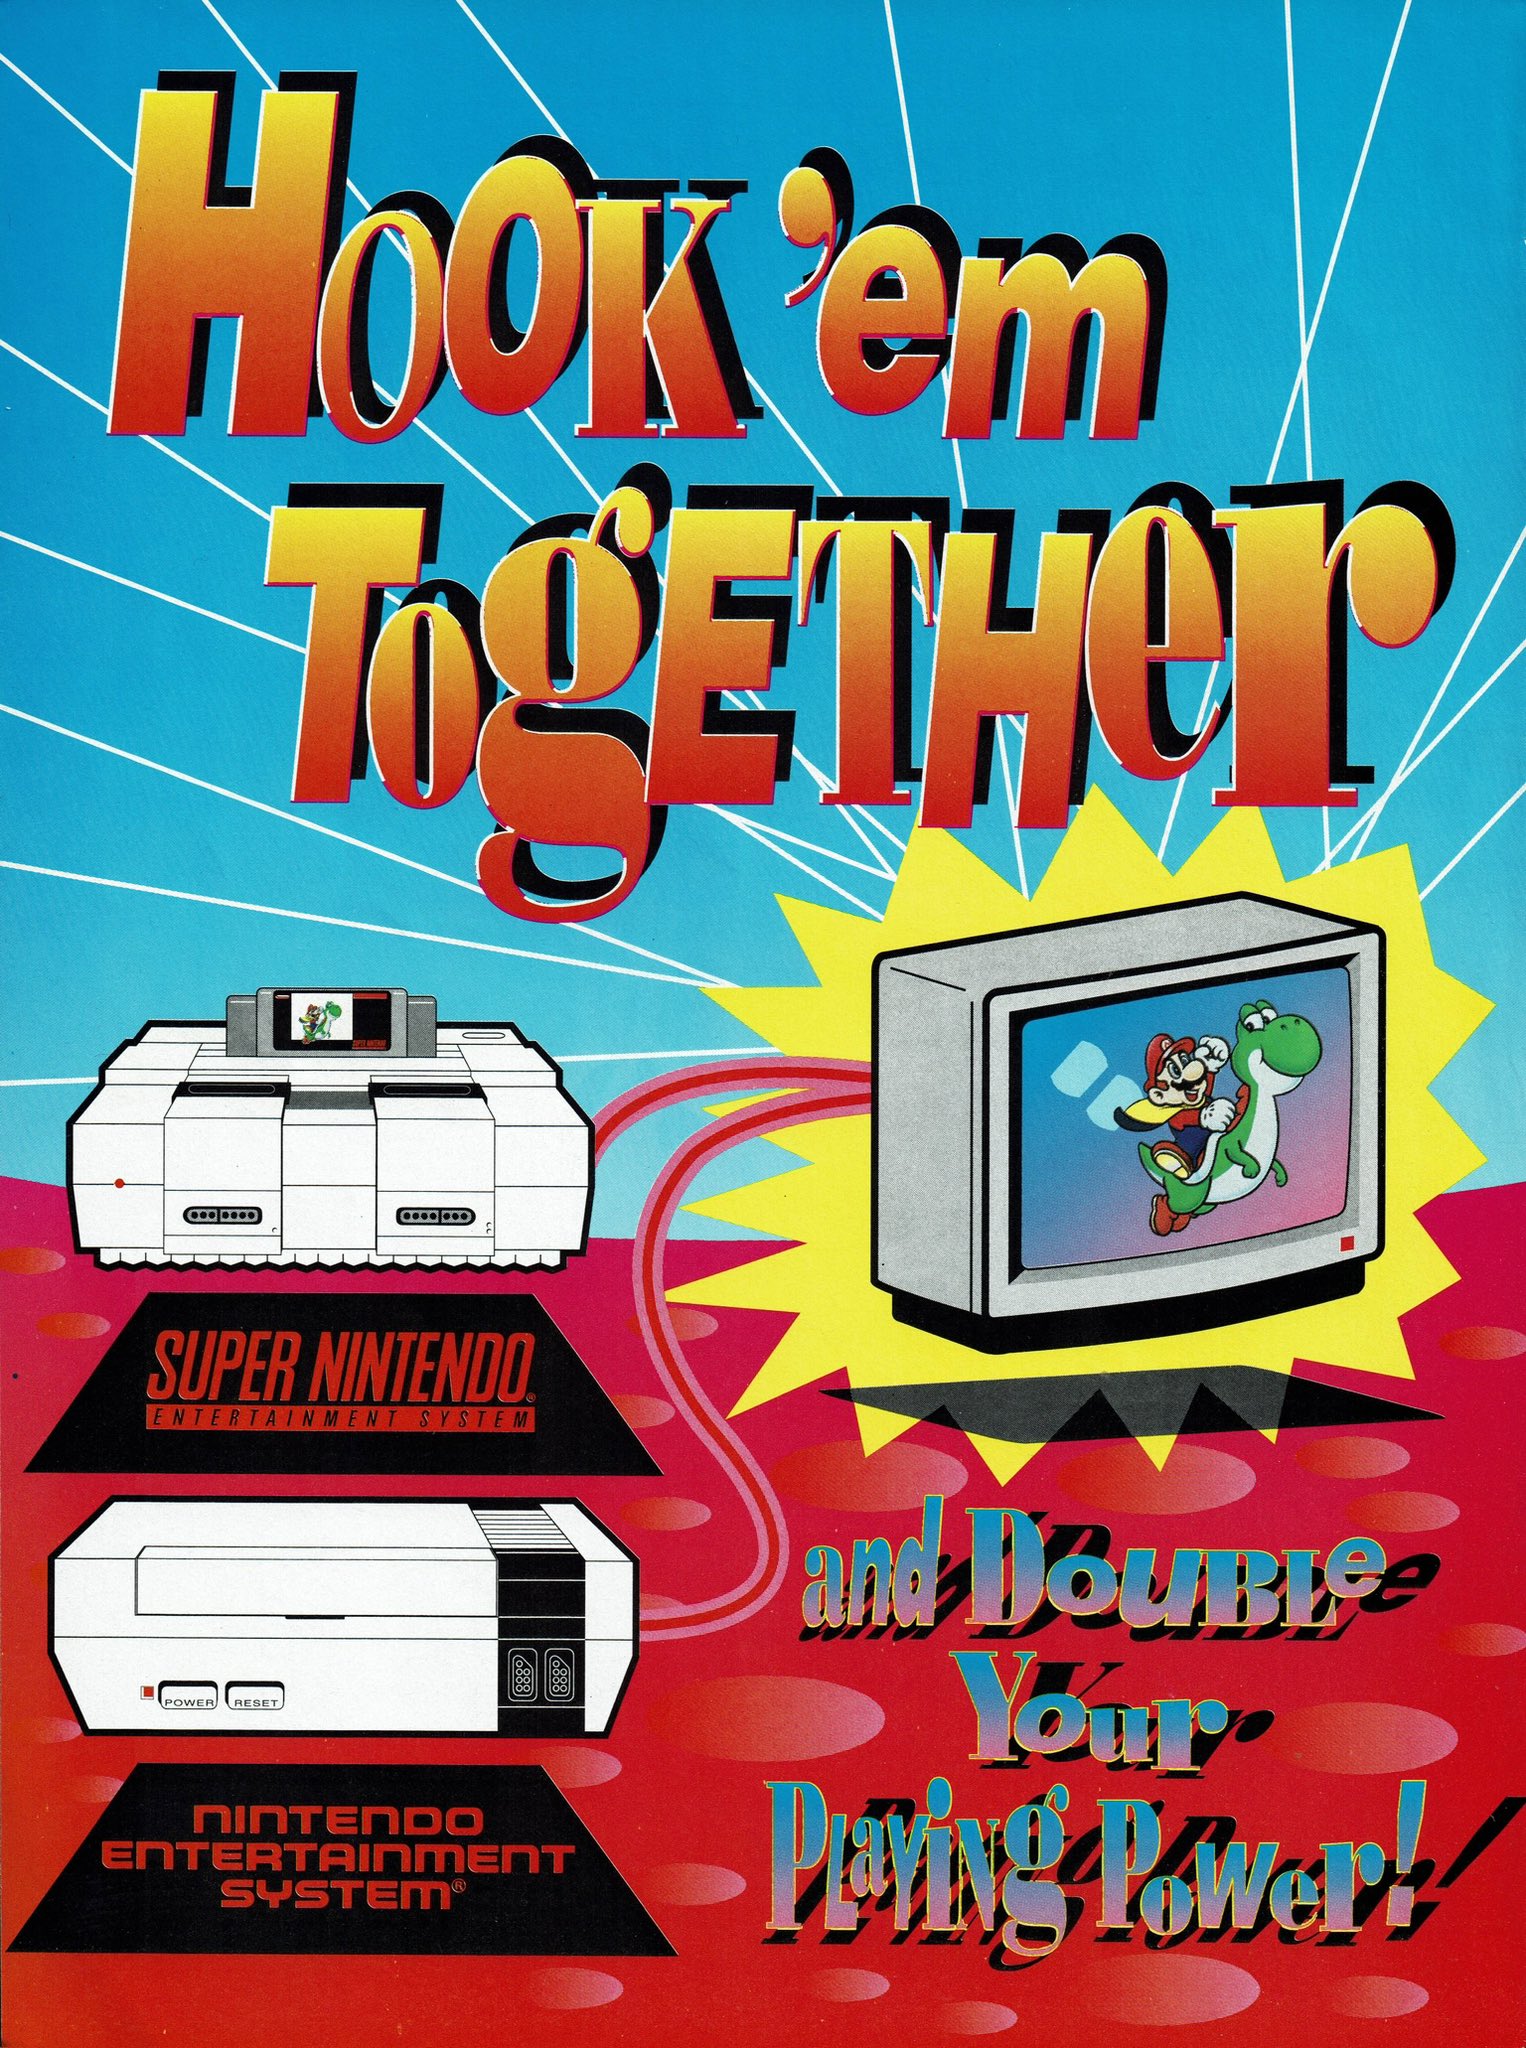 VideoGameArt&Tidbits on X: Super Nintendo - Hook 'em Together ad (1992).  When the SNES was released, Nintendo wanted people to know you can have  both your NES and SNES hooked up to